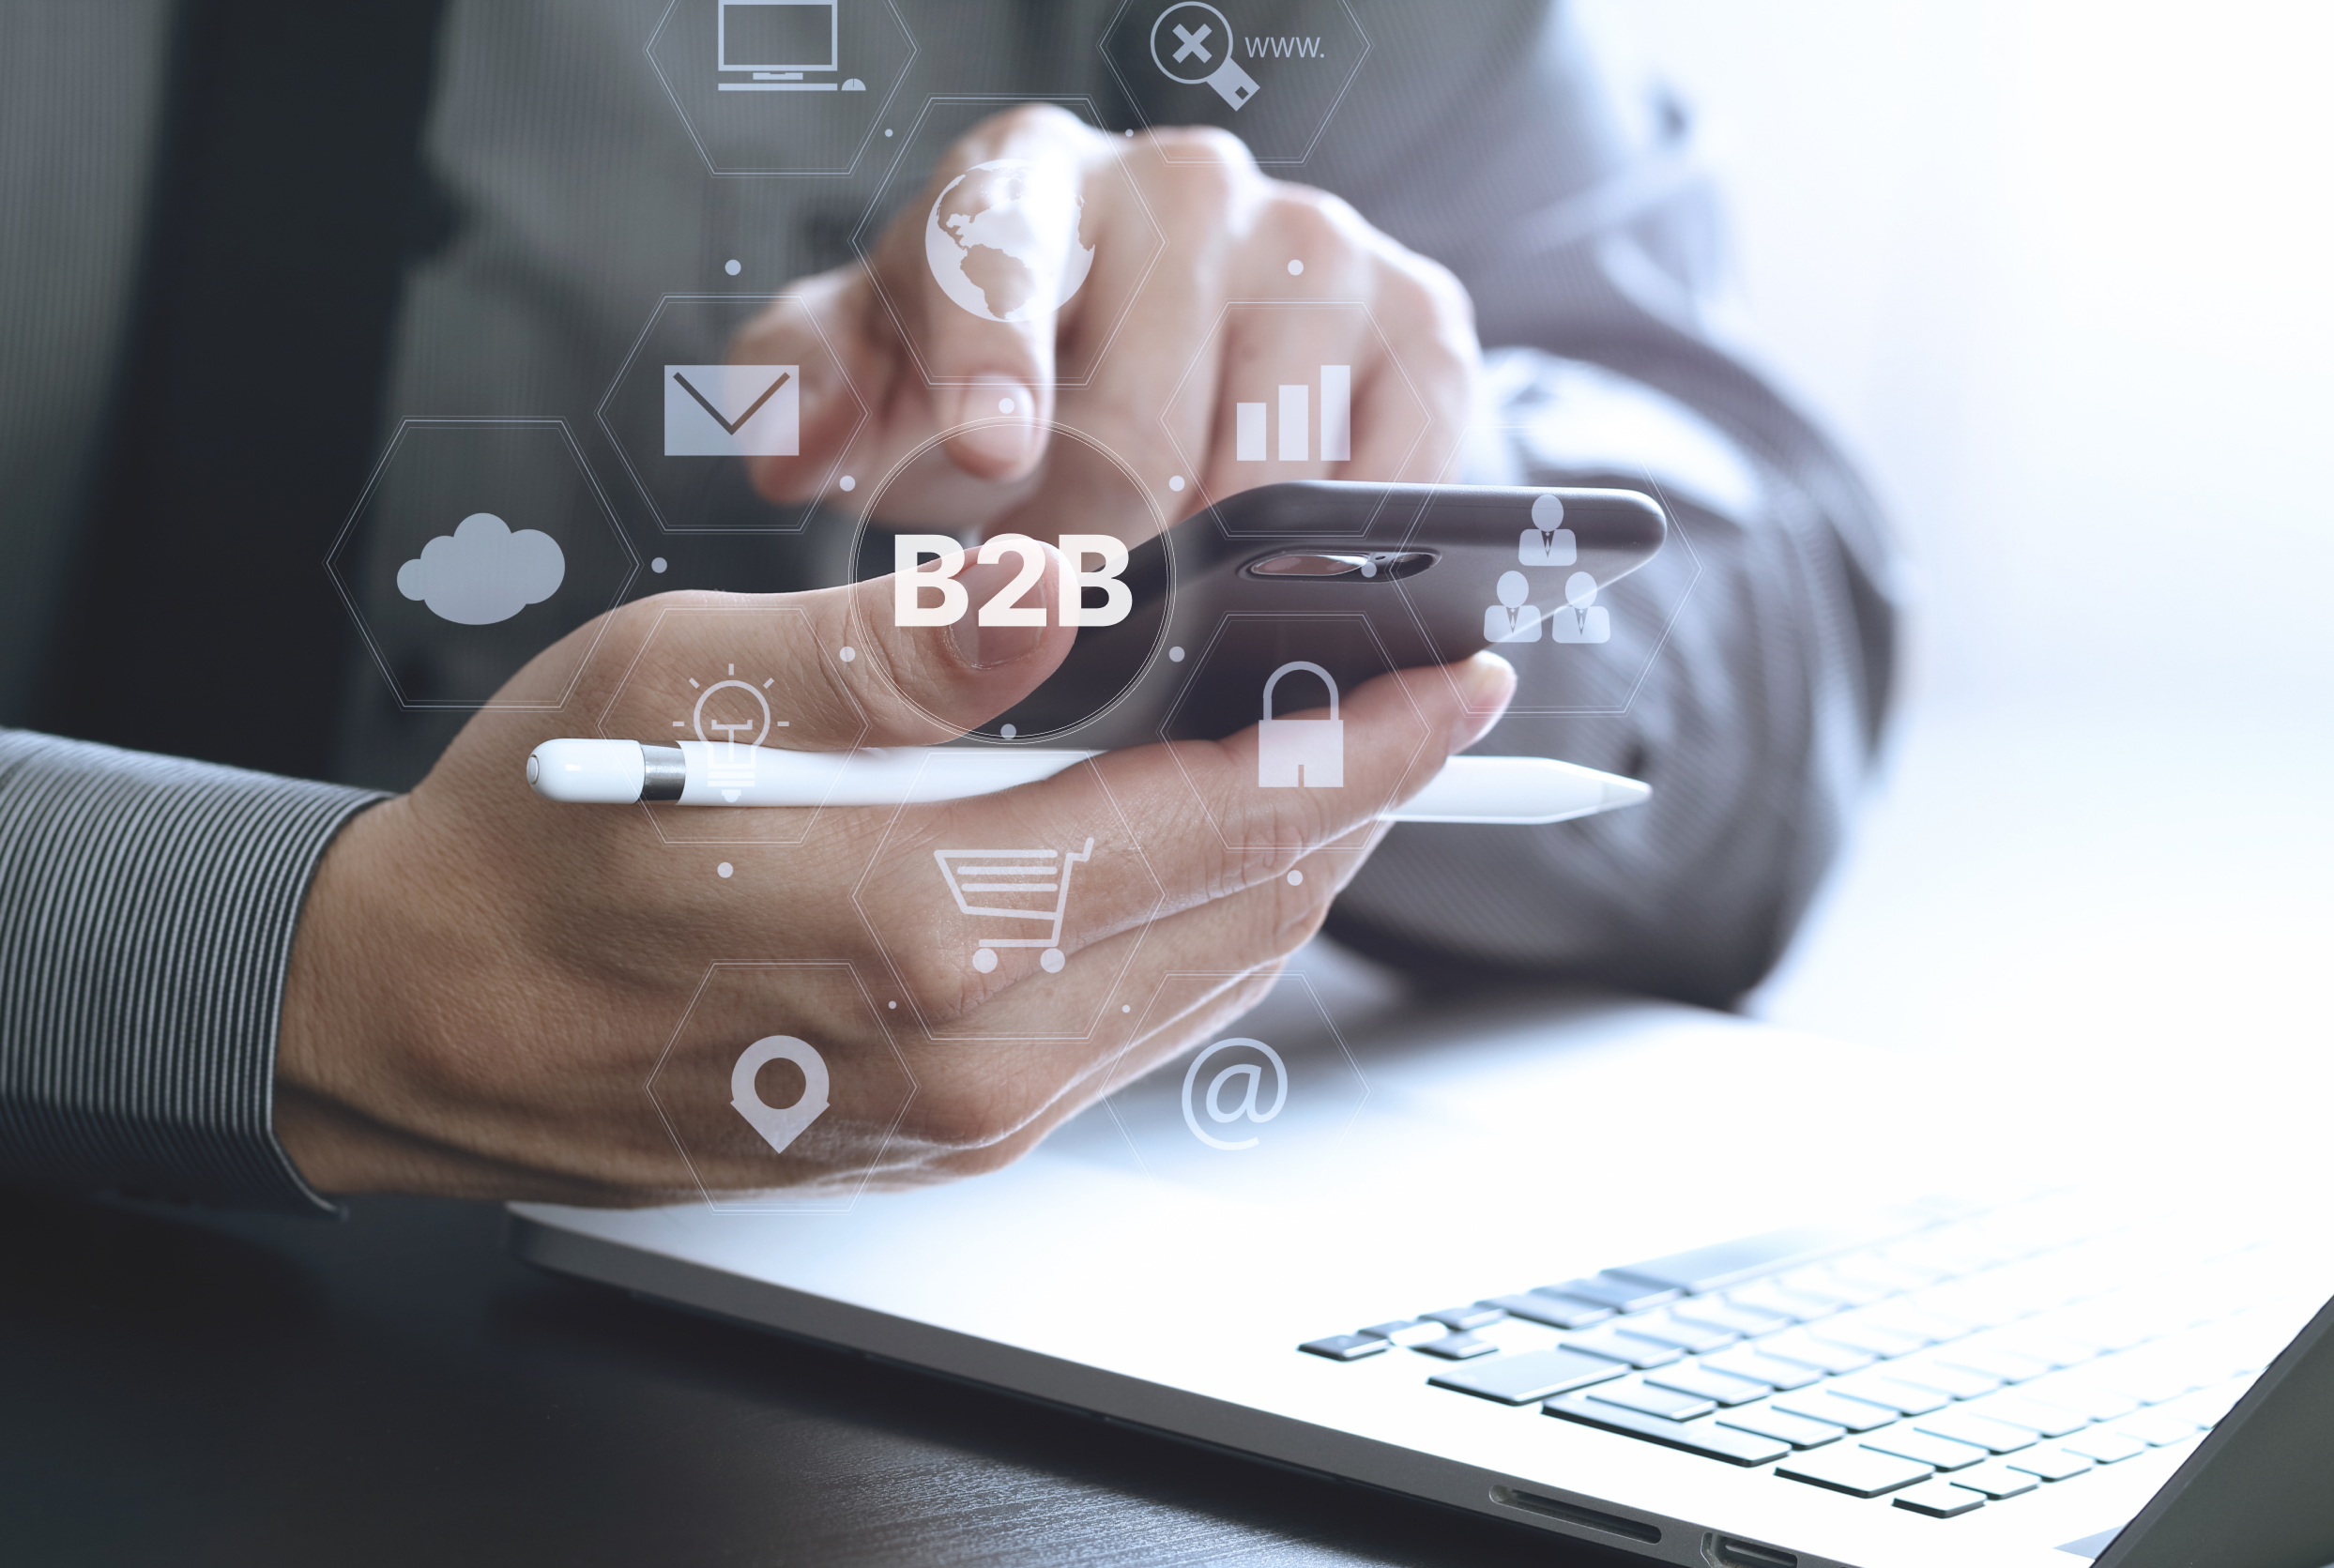 B2B E-Commerce: Opportunities or Challenges?